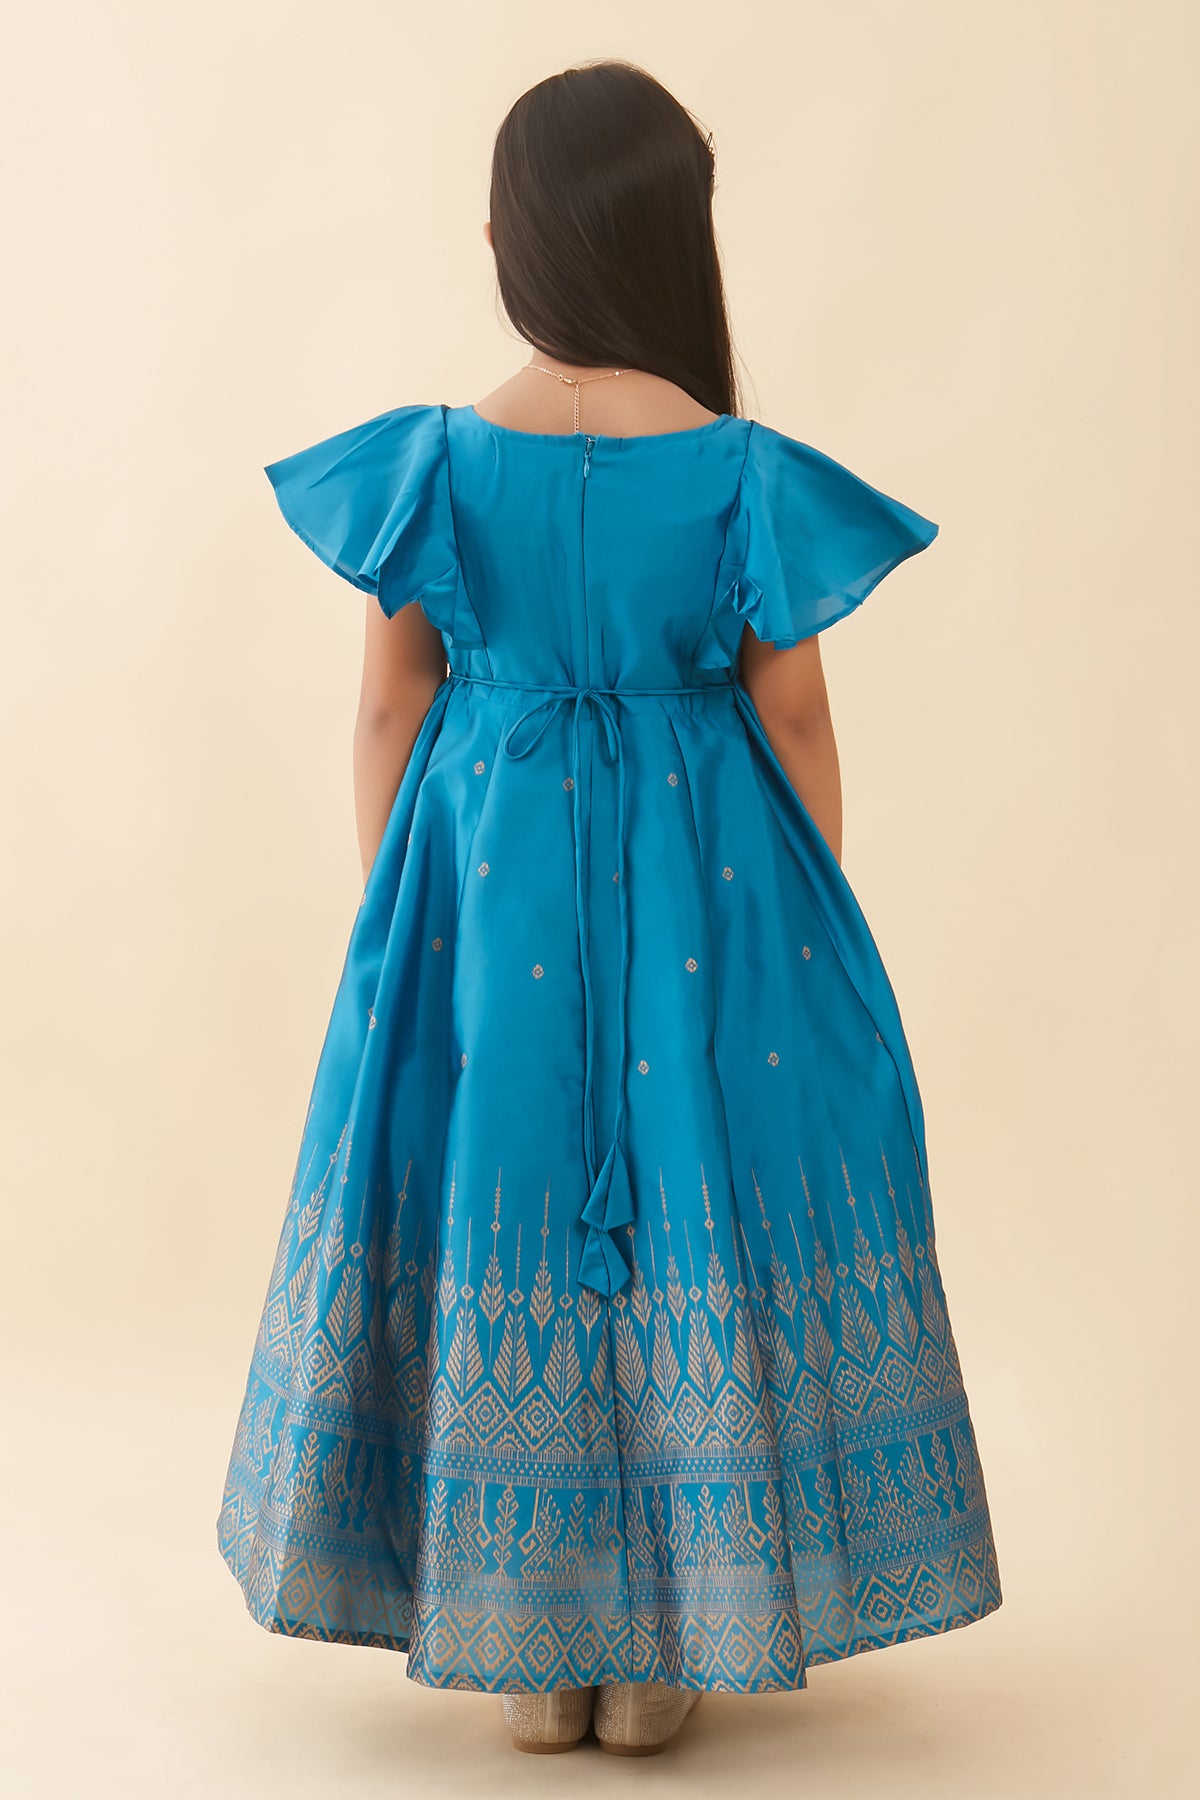 Jewel Inspired Embroidered Neckline With Geometric Printed Anarkali - Blue